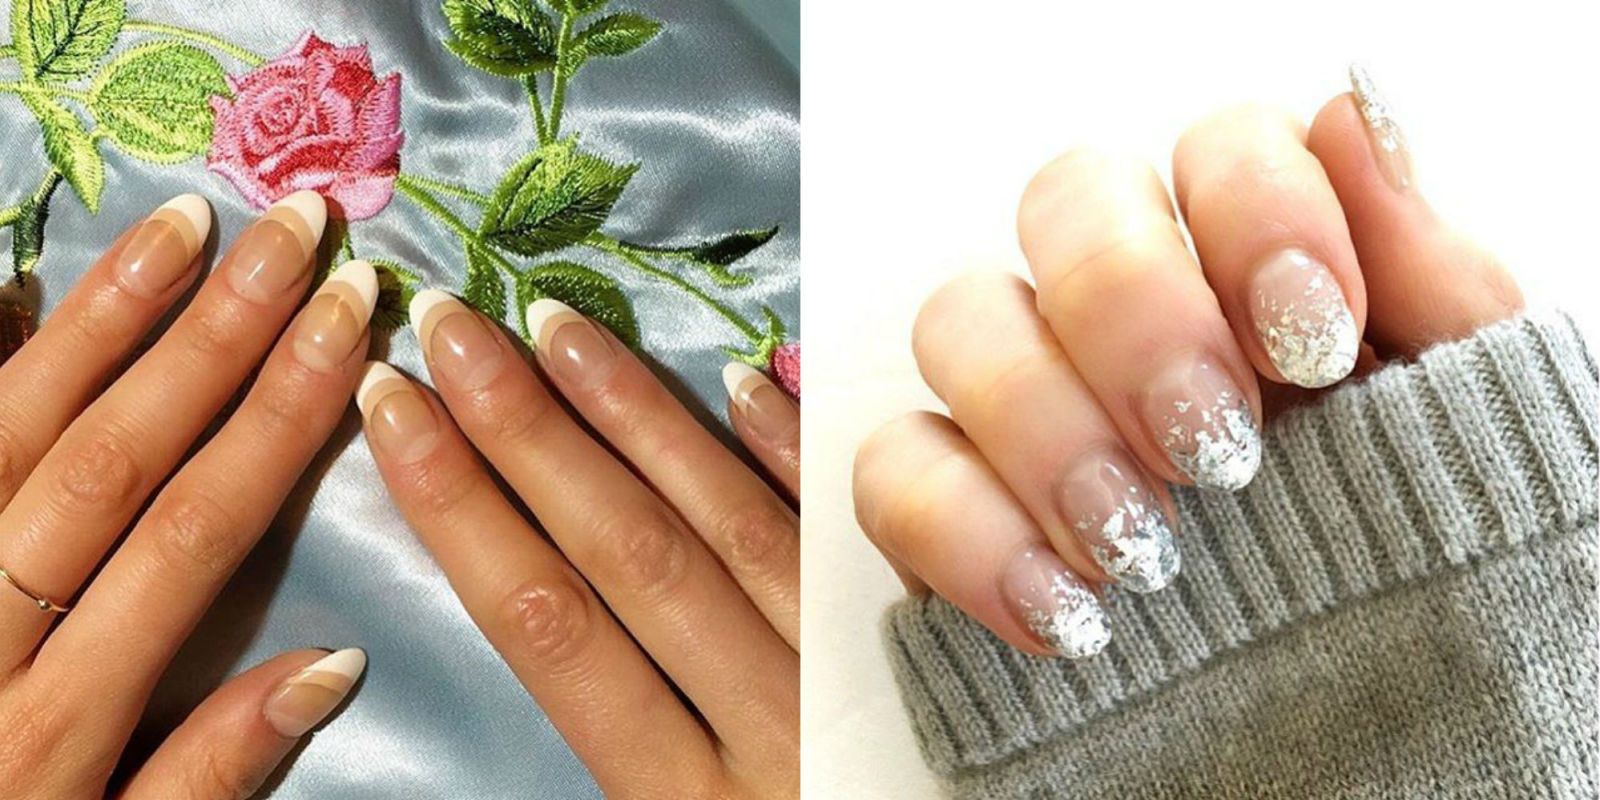 17 Nail Art Ideas That Are So Cool It's Criminal